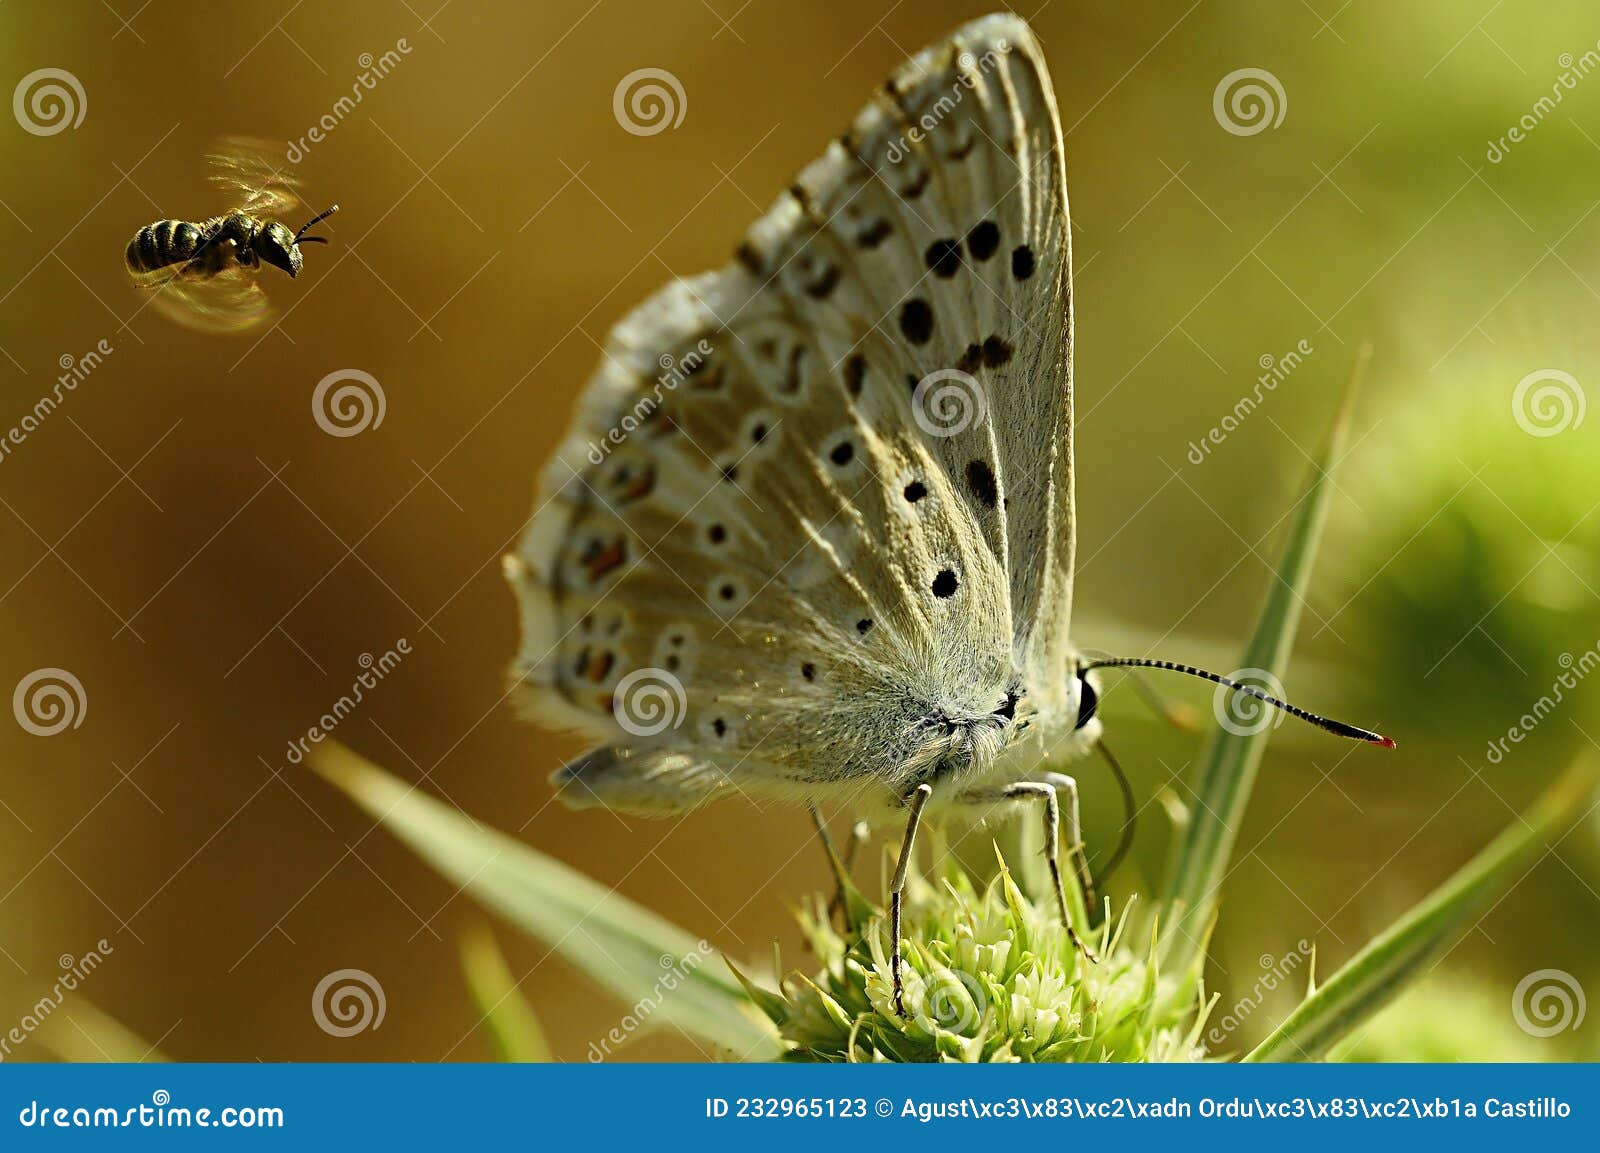 day butterfly perched on flower, lysandra albicans